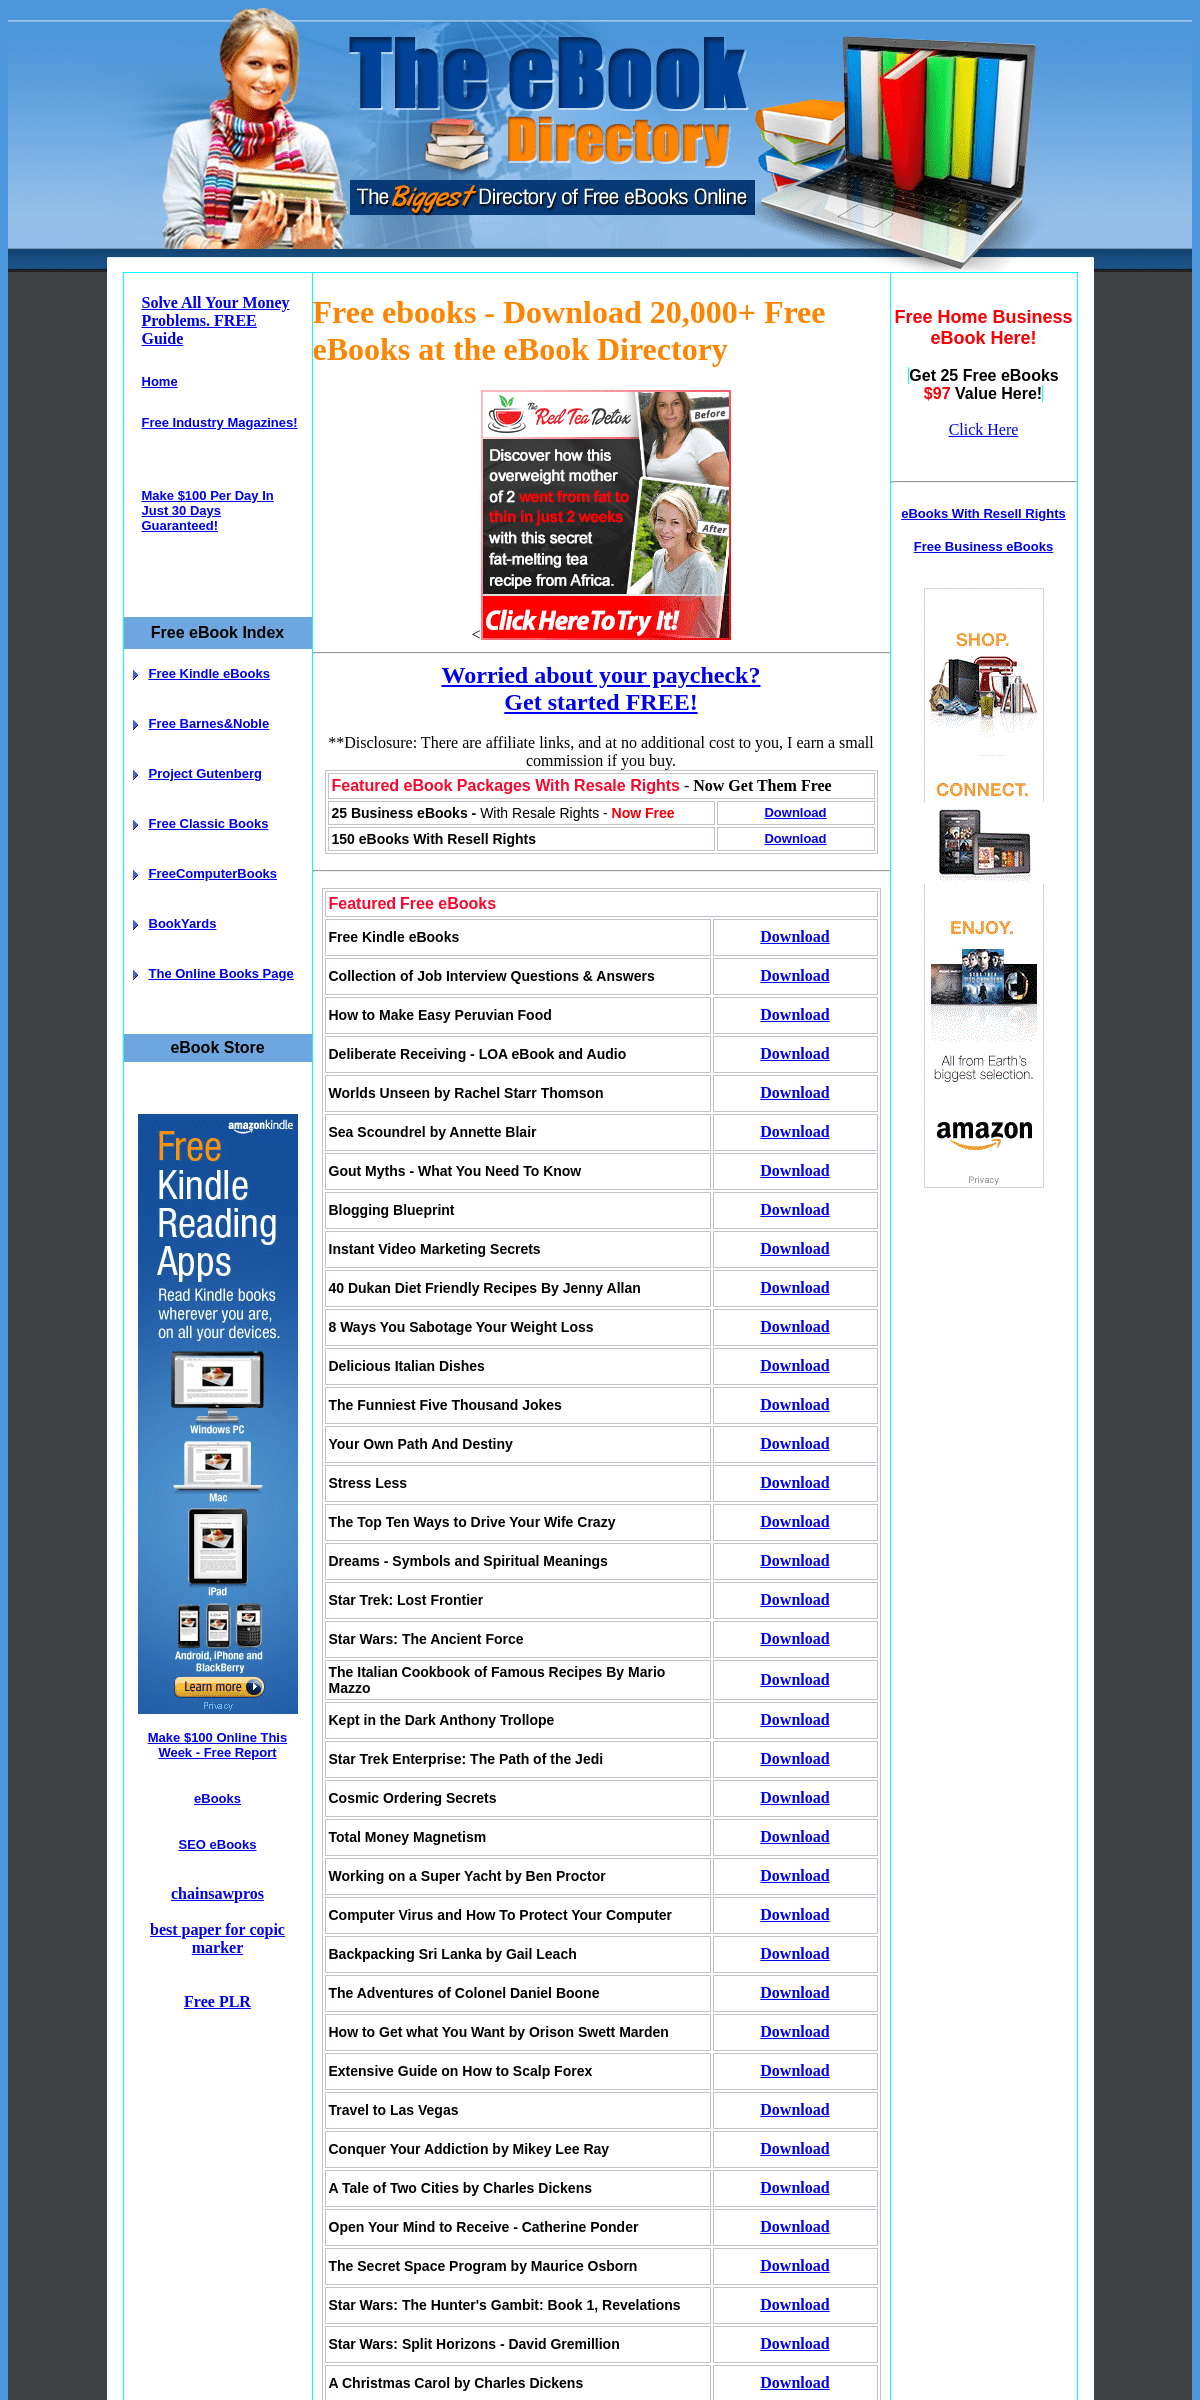 A complete backup of ebookdirectory.com